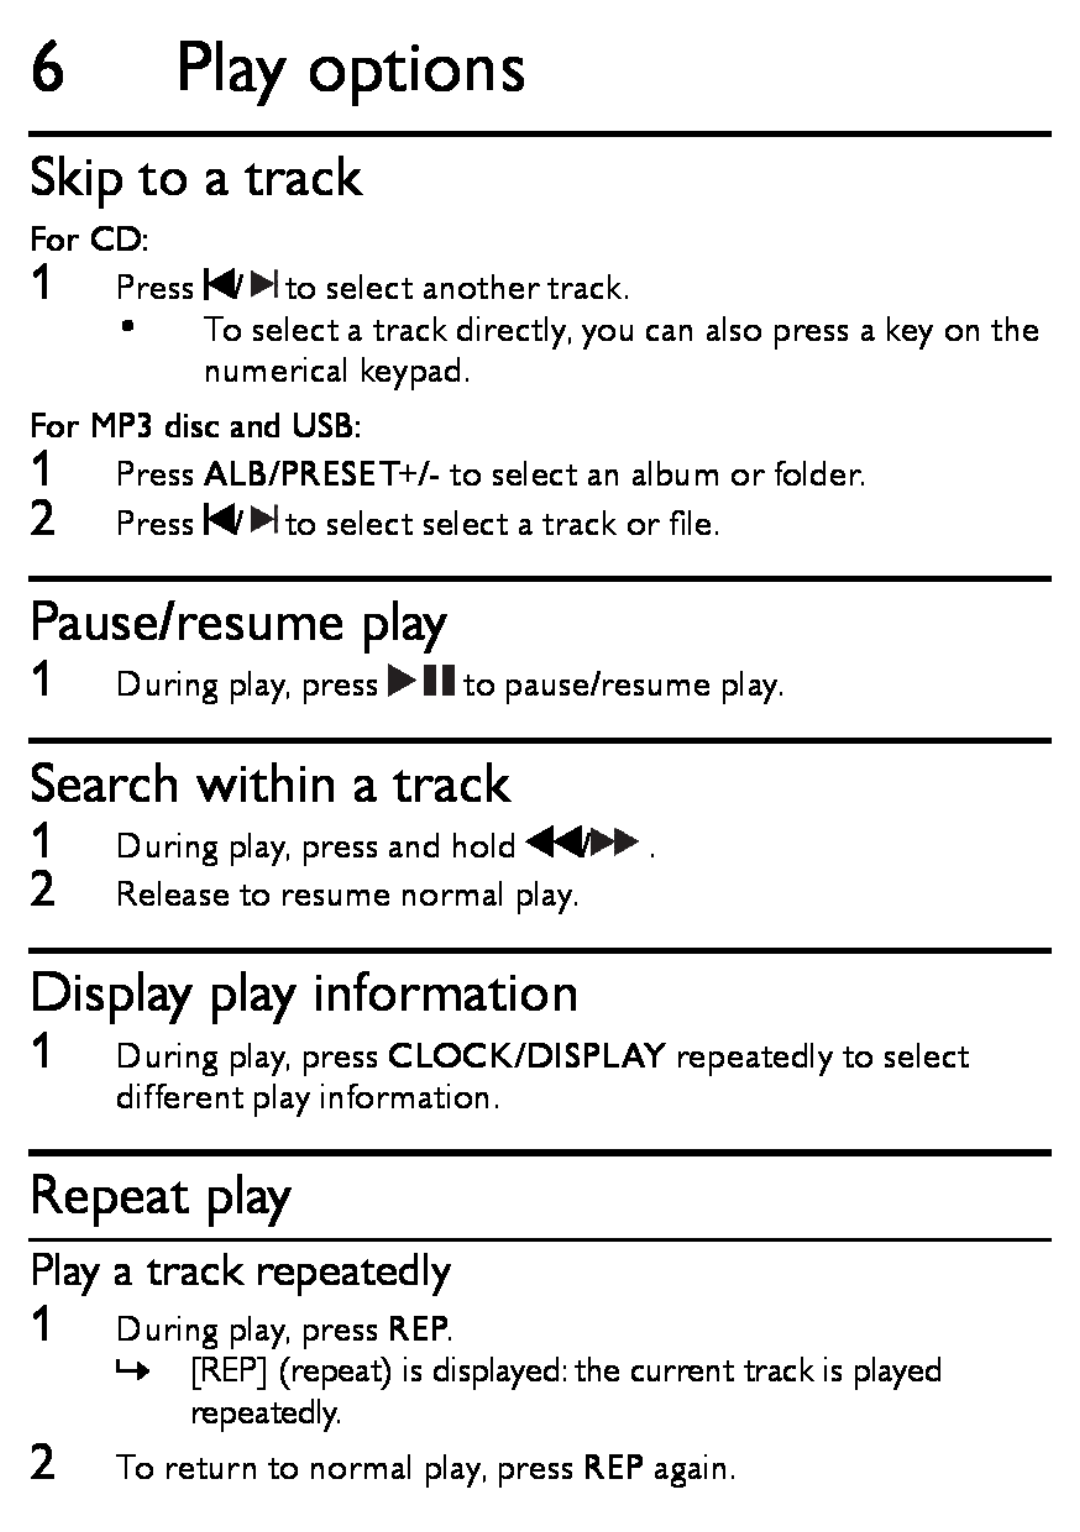 Philips MCM166 Play options, Skip to a track, Pause/resume play, Search within a track, Display play information 